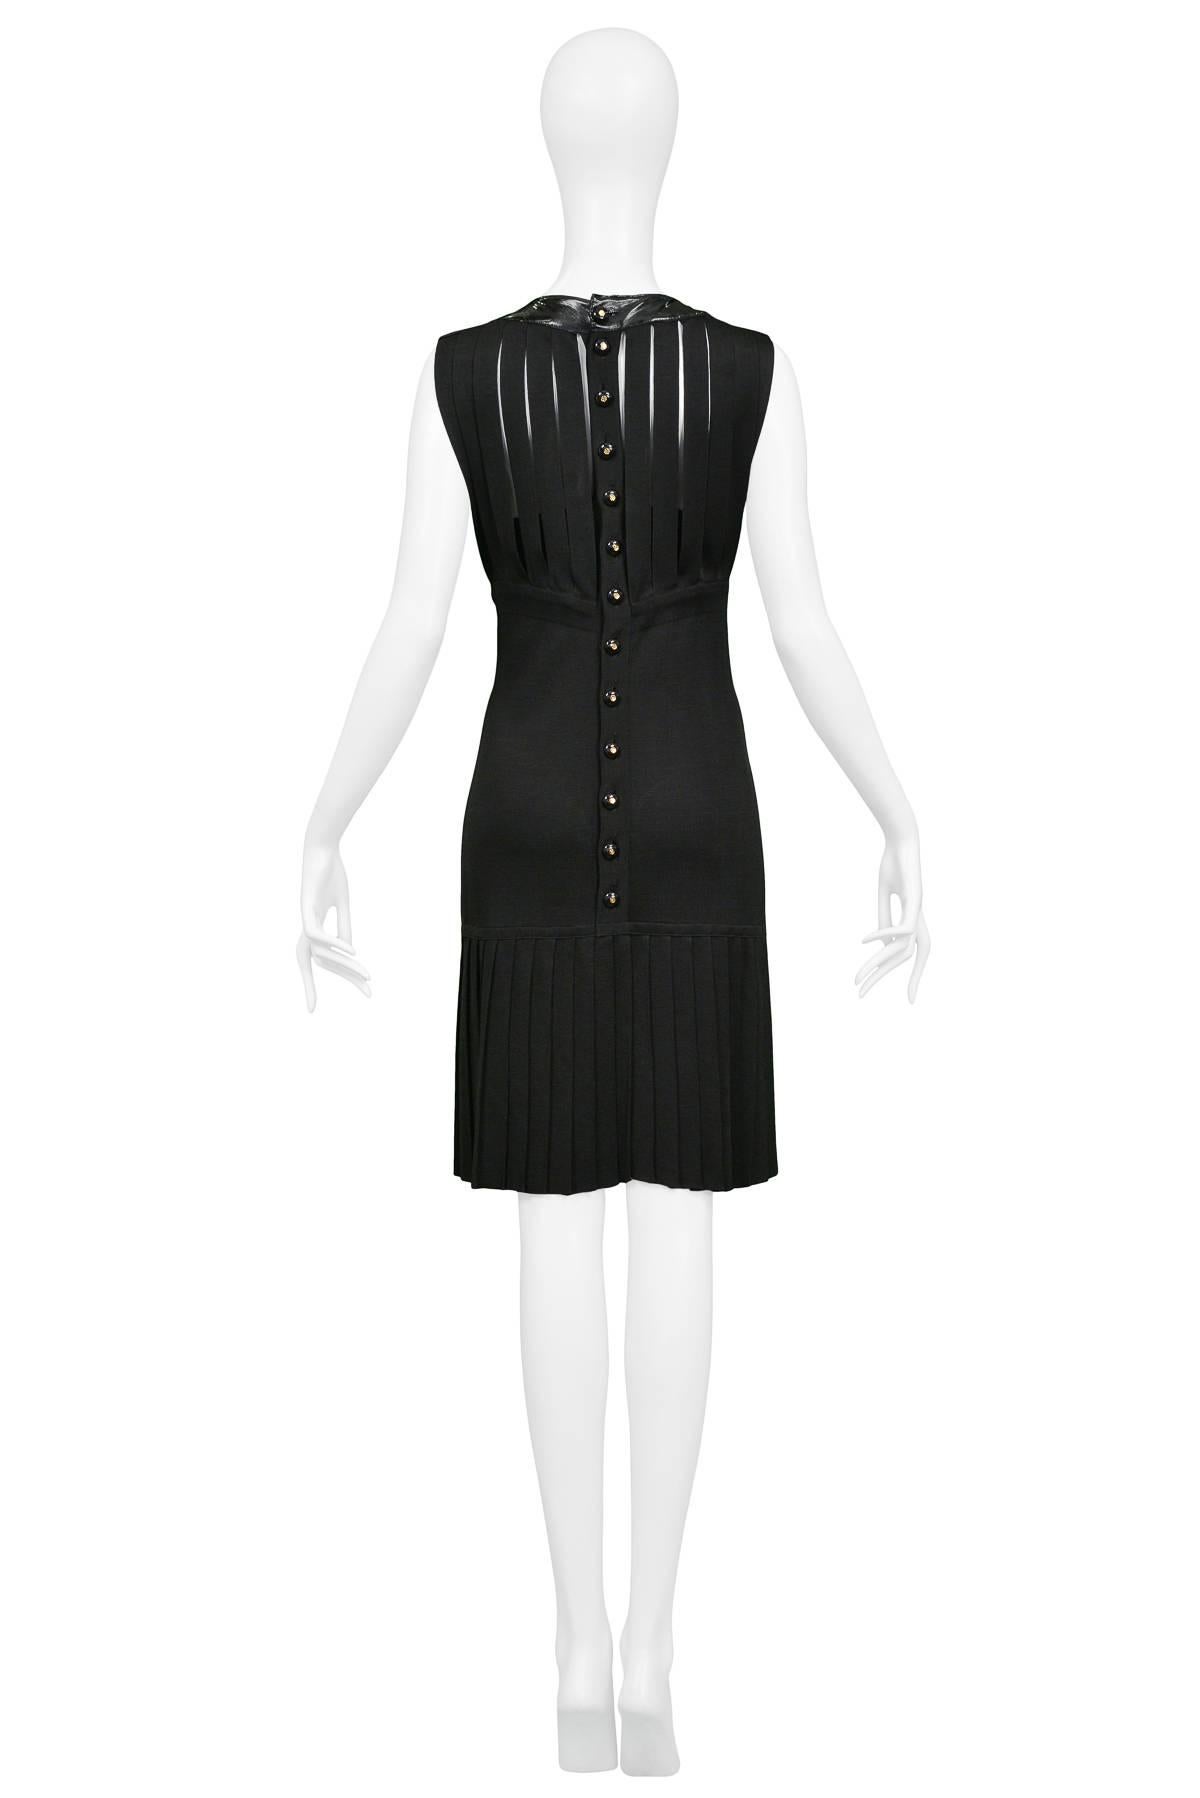 Women's Chanel Black Knit and Patent Leather Cut-Out Dress, 1990s 